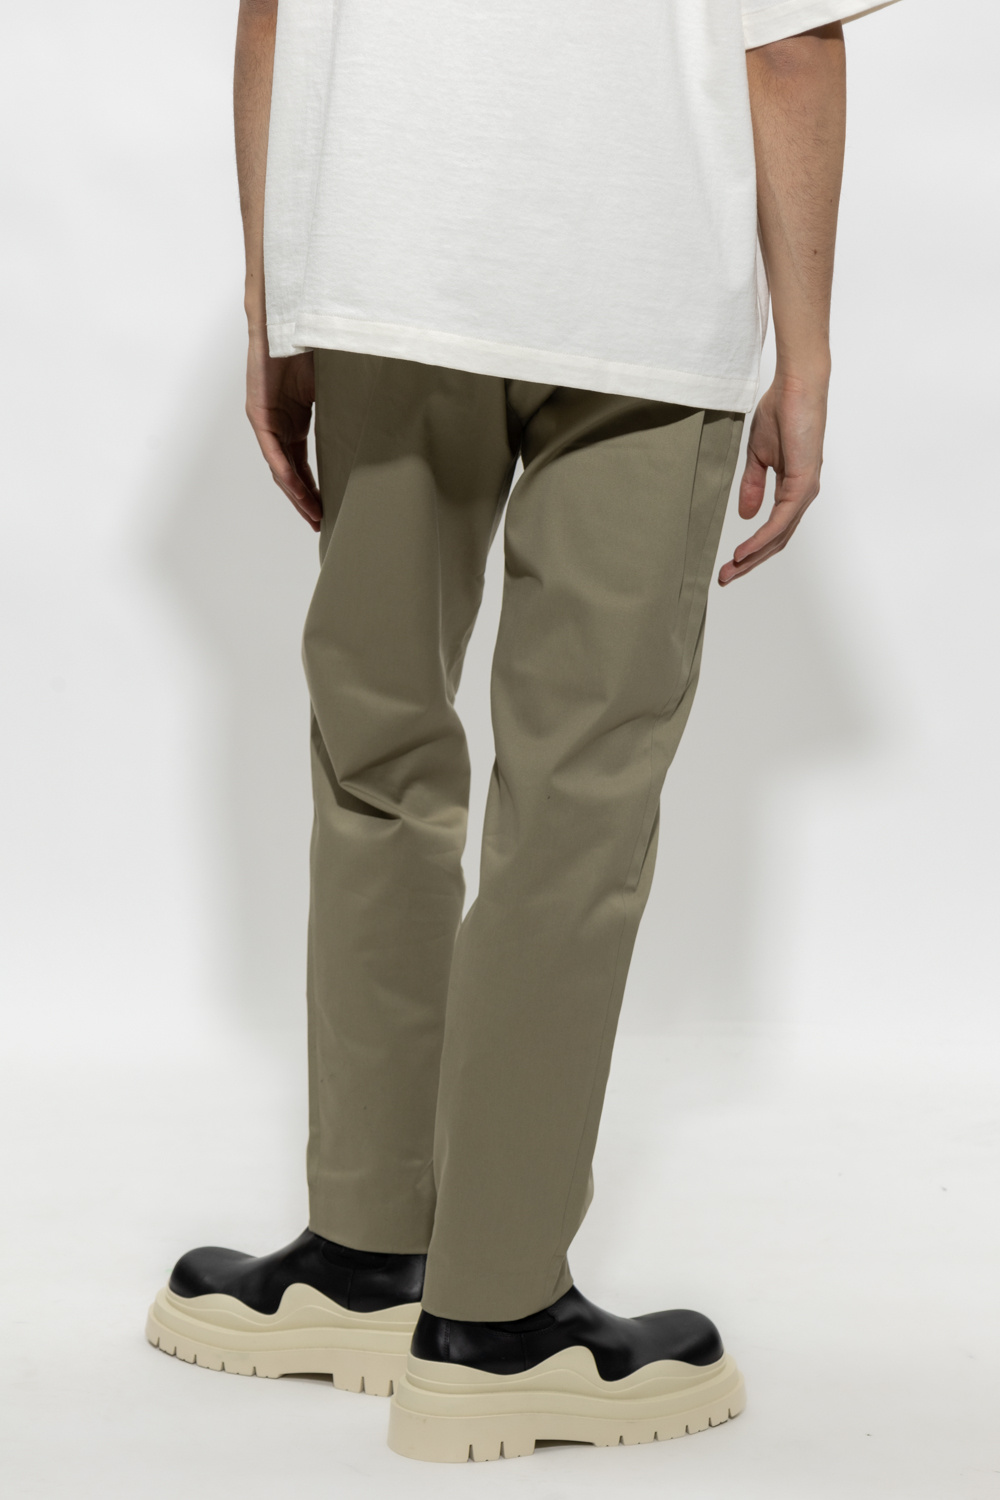 Paul Smith Pleat-front com trousers